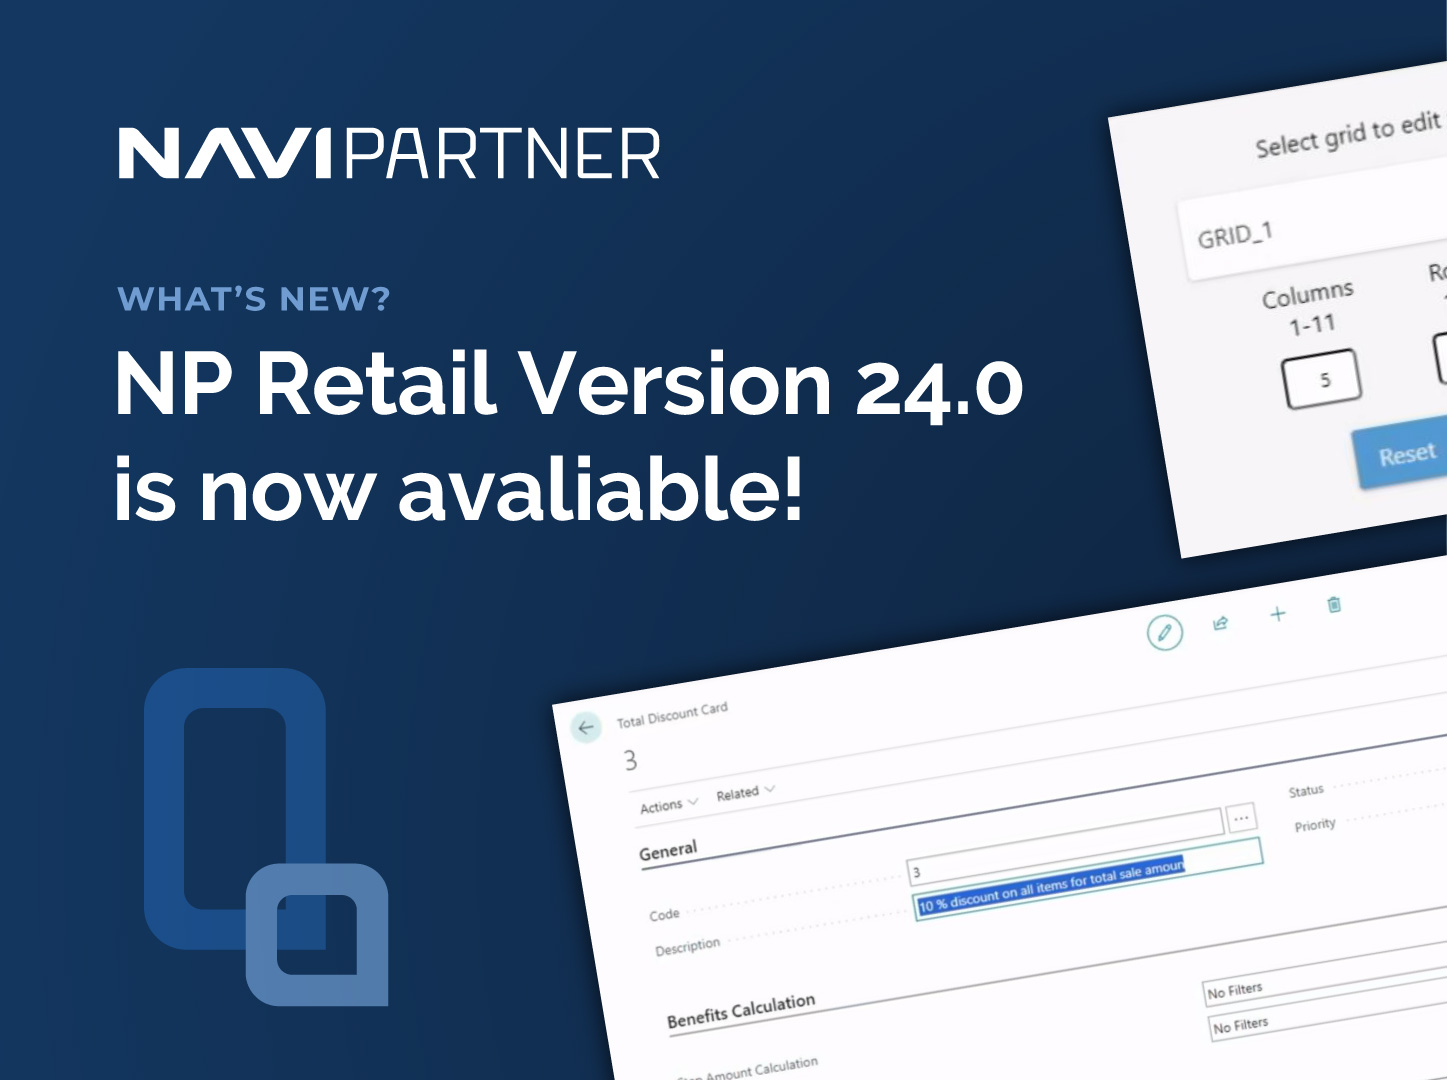 NP Retail Version 24.0: All you need to know about the latest version of our NP Retail solution!